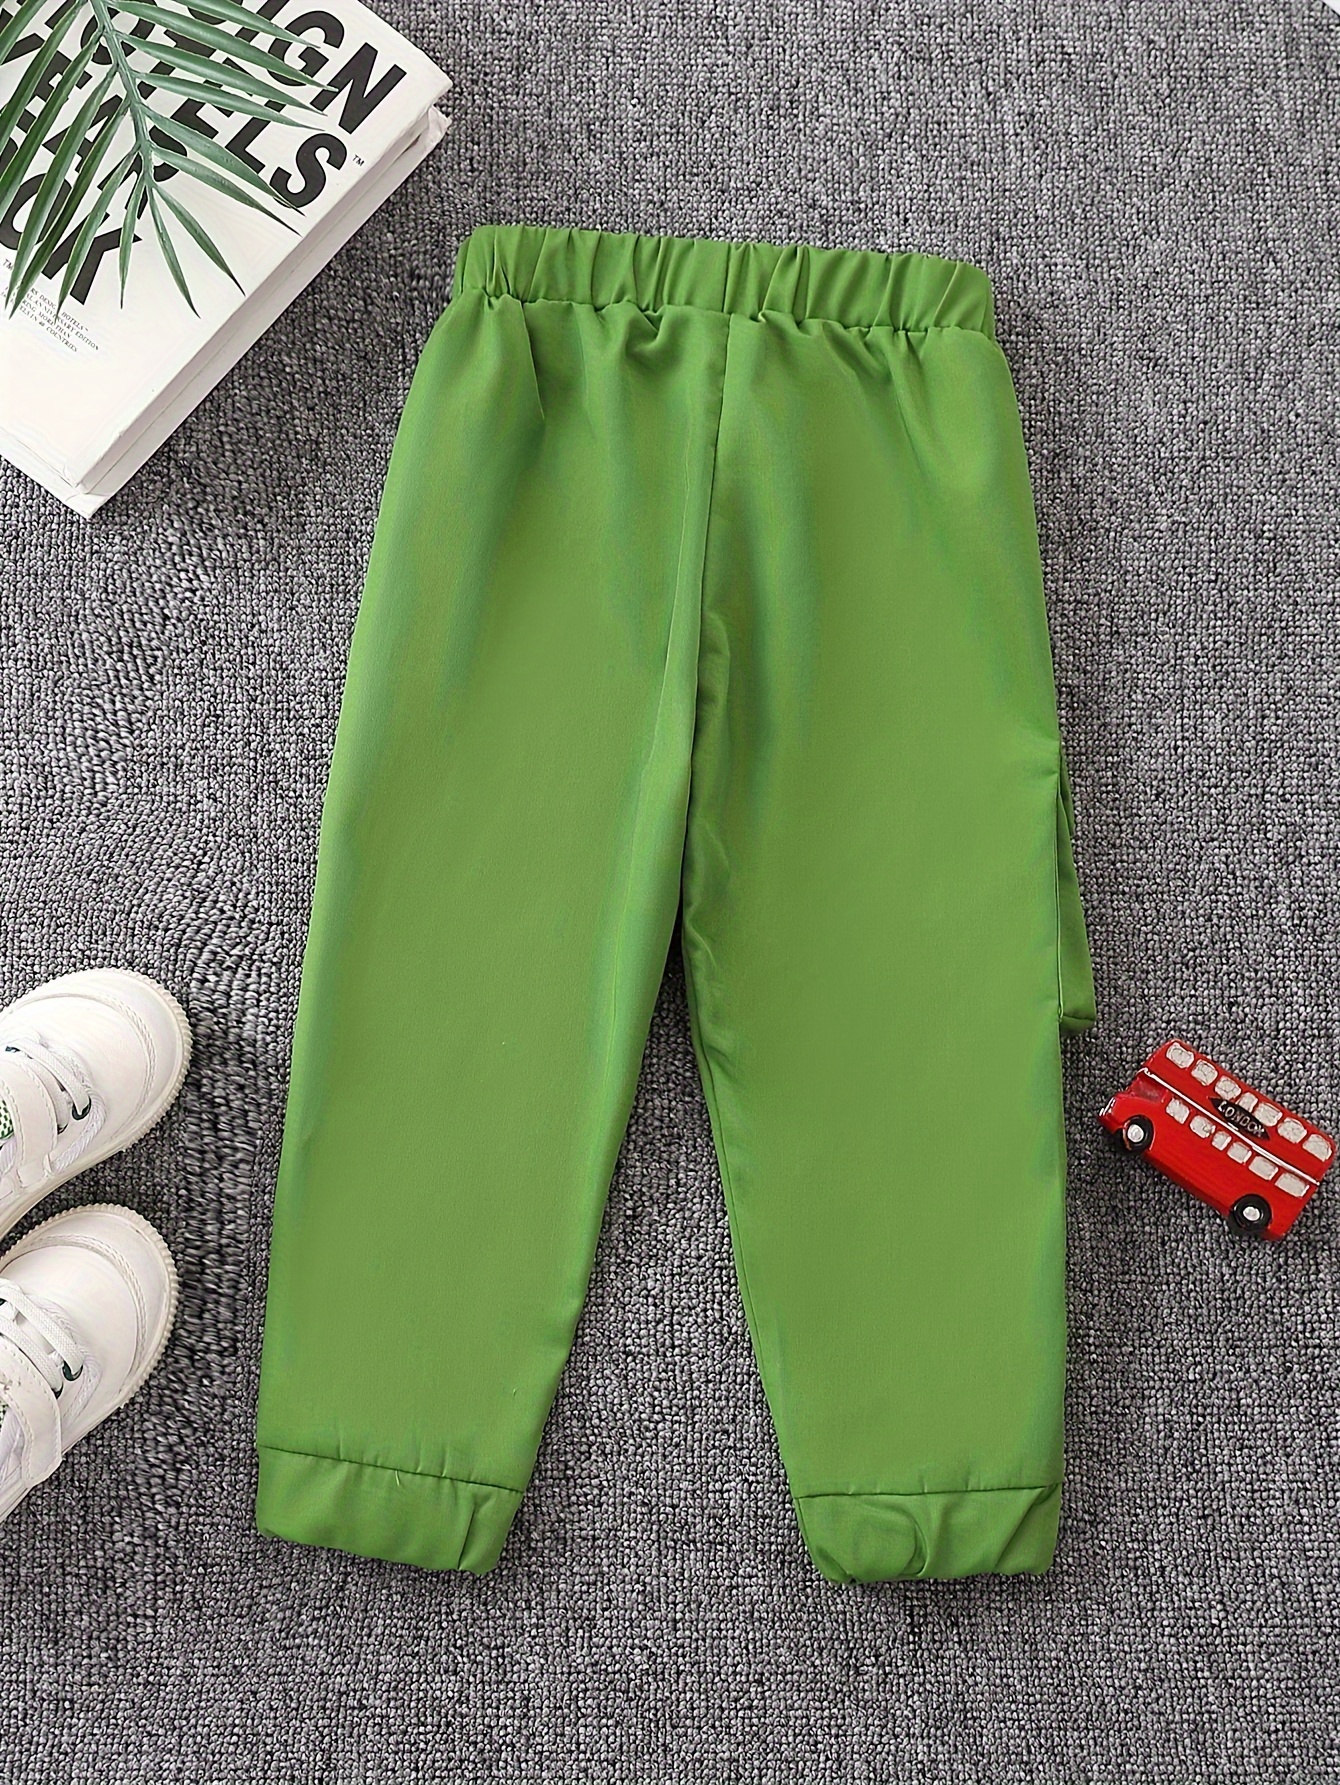 Kid's Street Style Pocket Patched Cargo Pants, Trendy Elastic Waist  Trousers, Boy's Clothes For Spring Fall